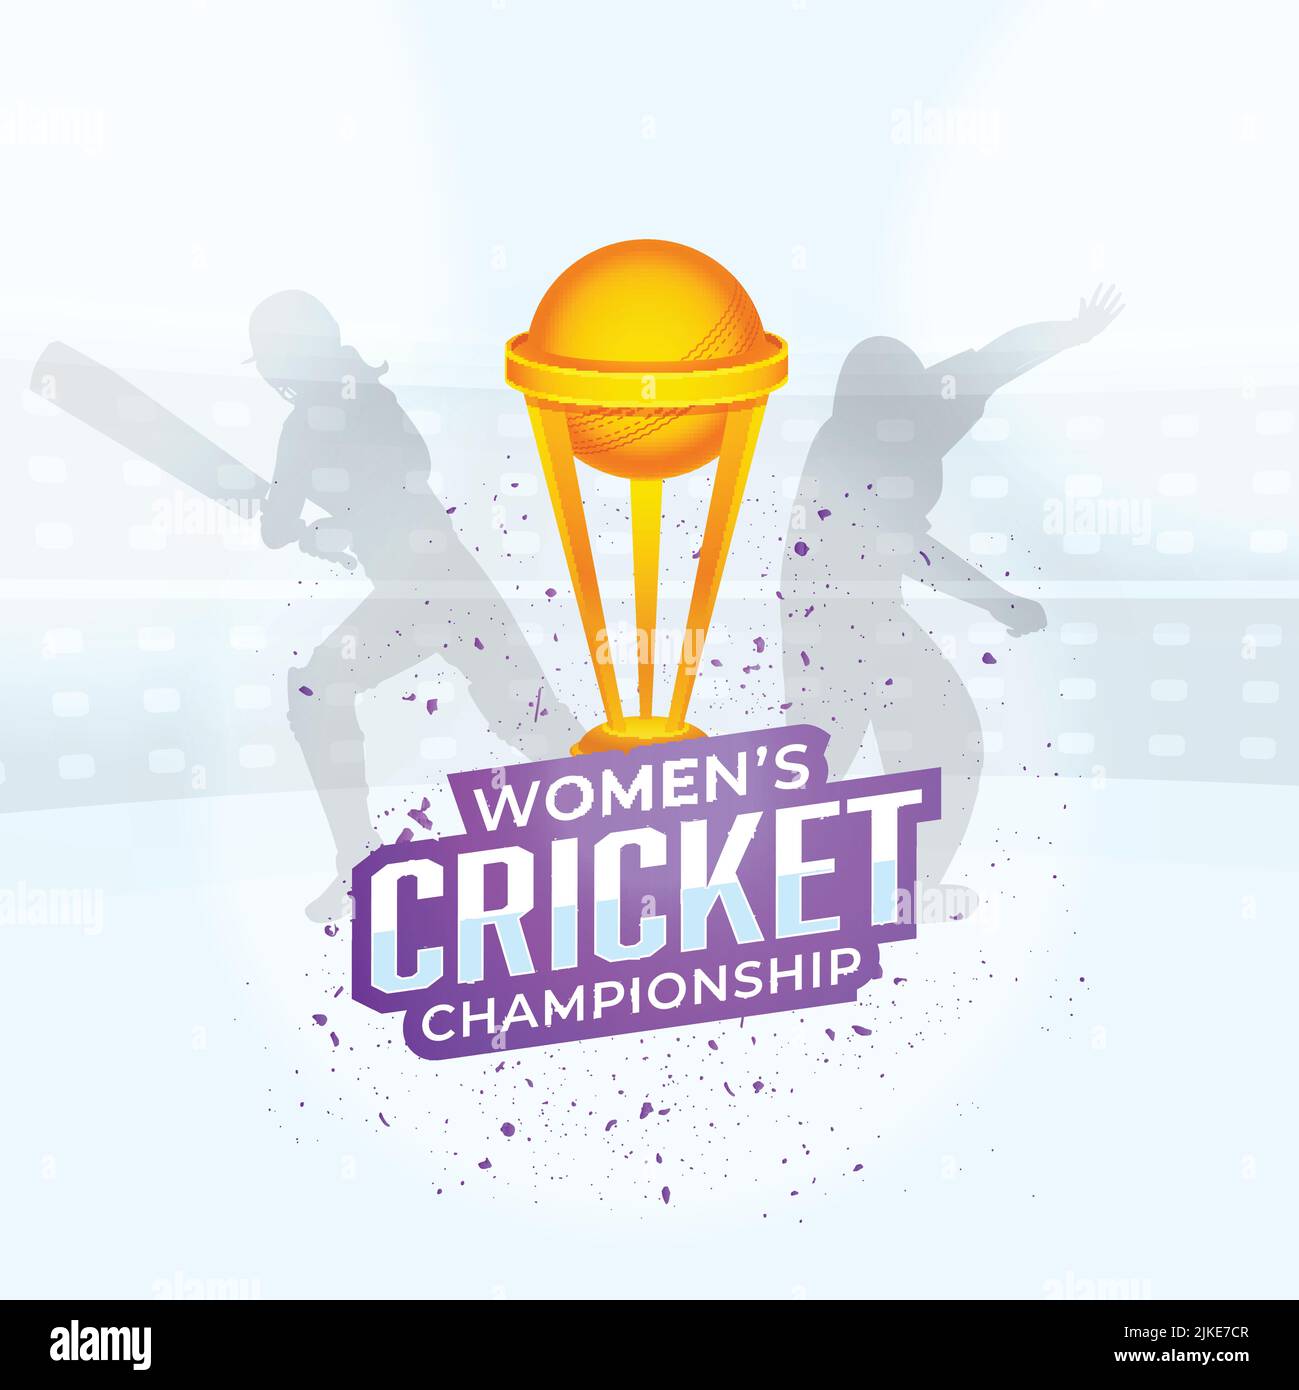 Sticker Style Women's Cricket Championship Font With 3D Winning Trophy Cup And Silhouette Cricketer Players On White And Blue Background. Stock Vector